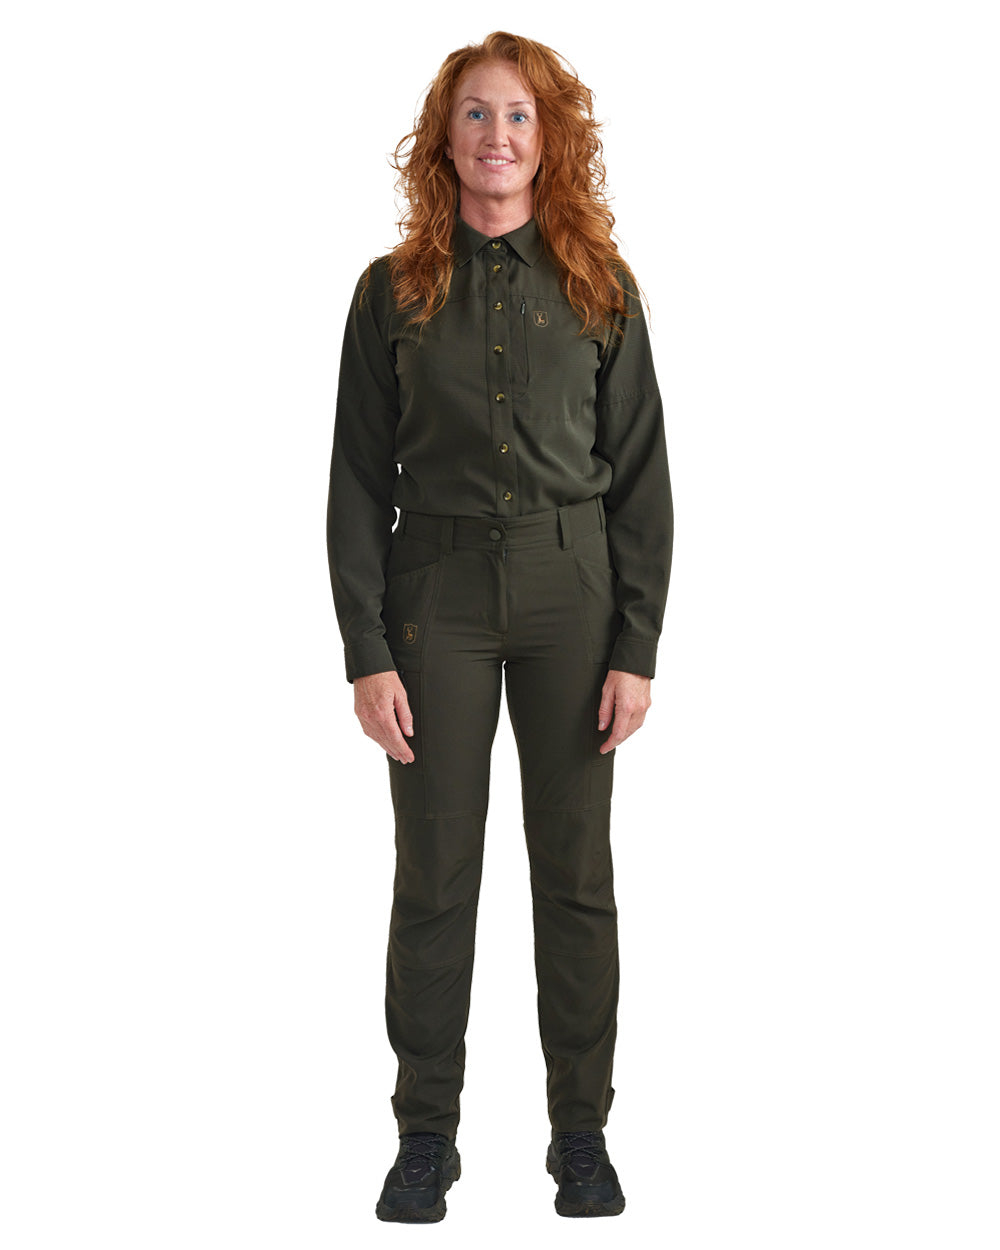 Forest Green coloured Deerhunter Lady Canopy Trousers on White background 